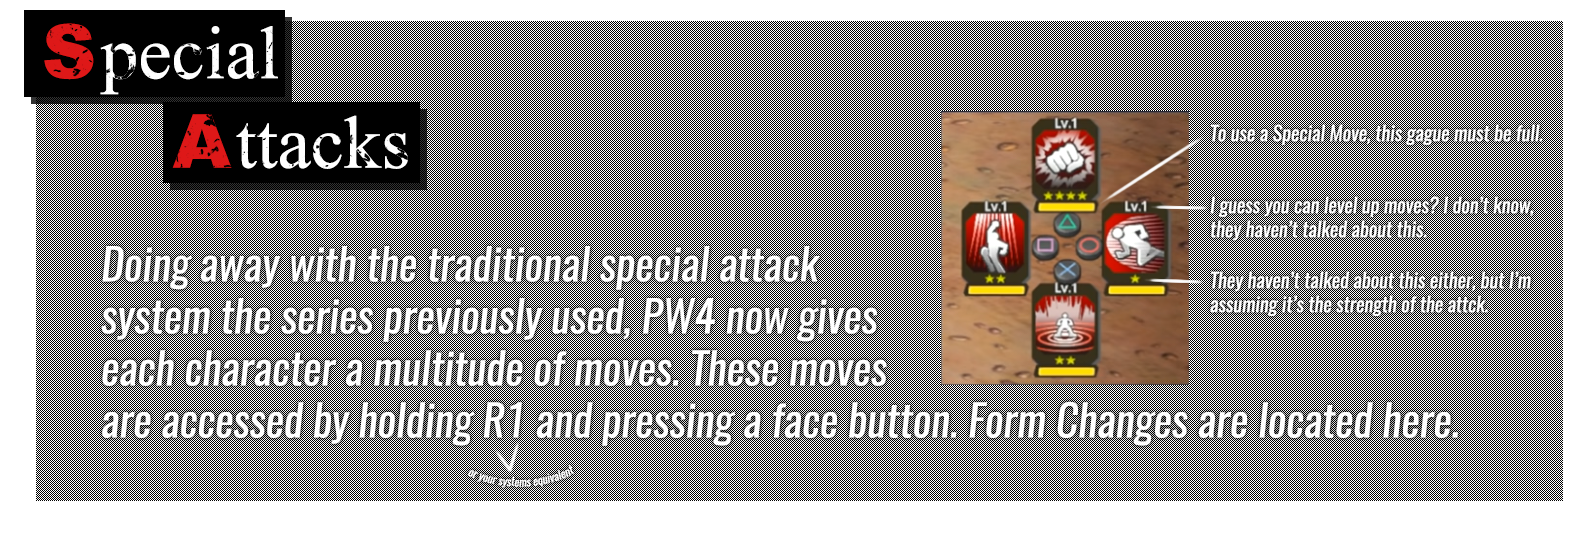 special-attacks26khc.png